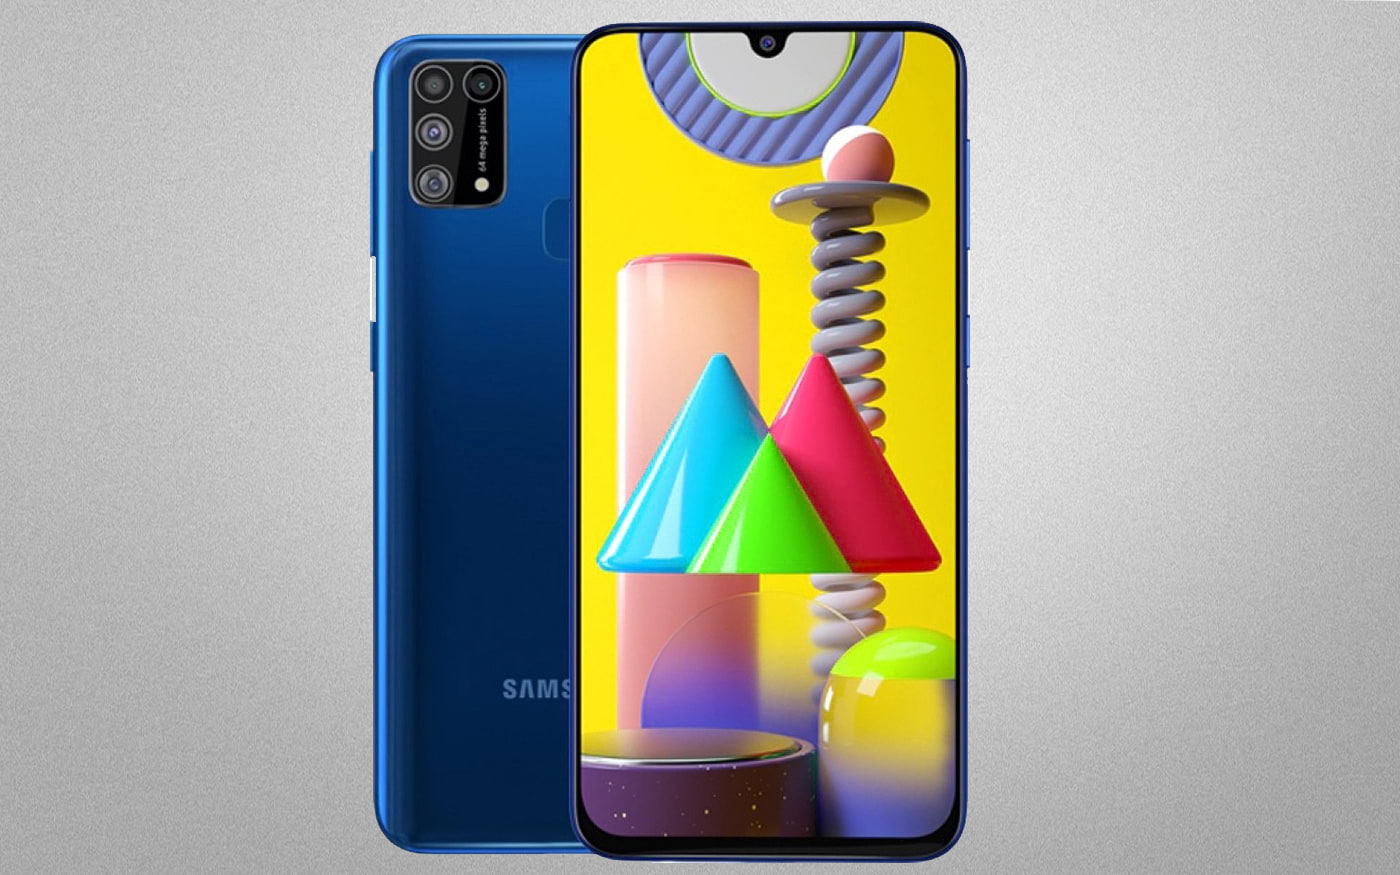 Galaxy M31 will be presented on February 25th with 6,000 mAh battery and 64MP camera